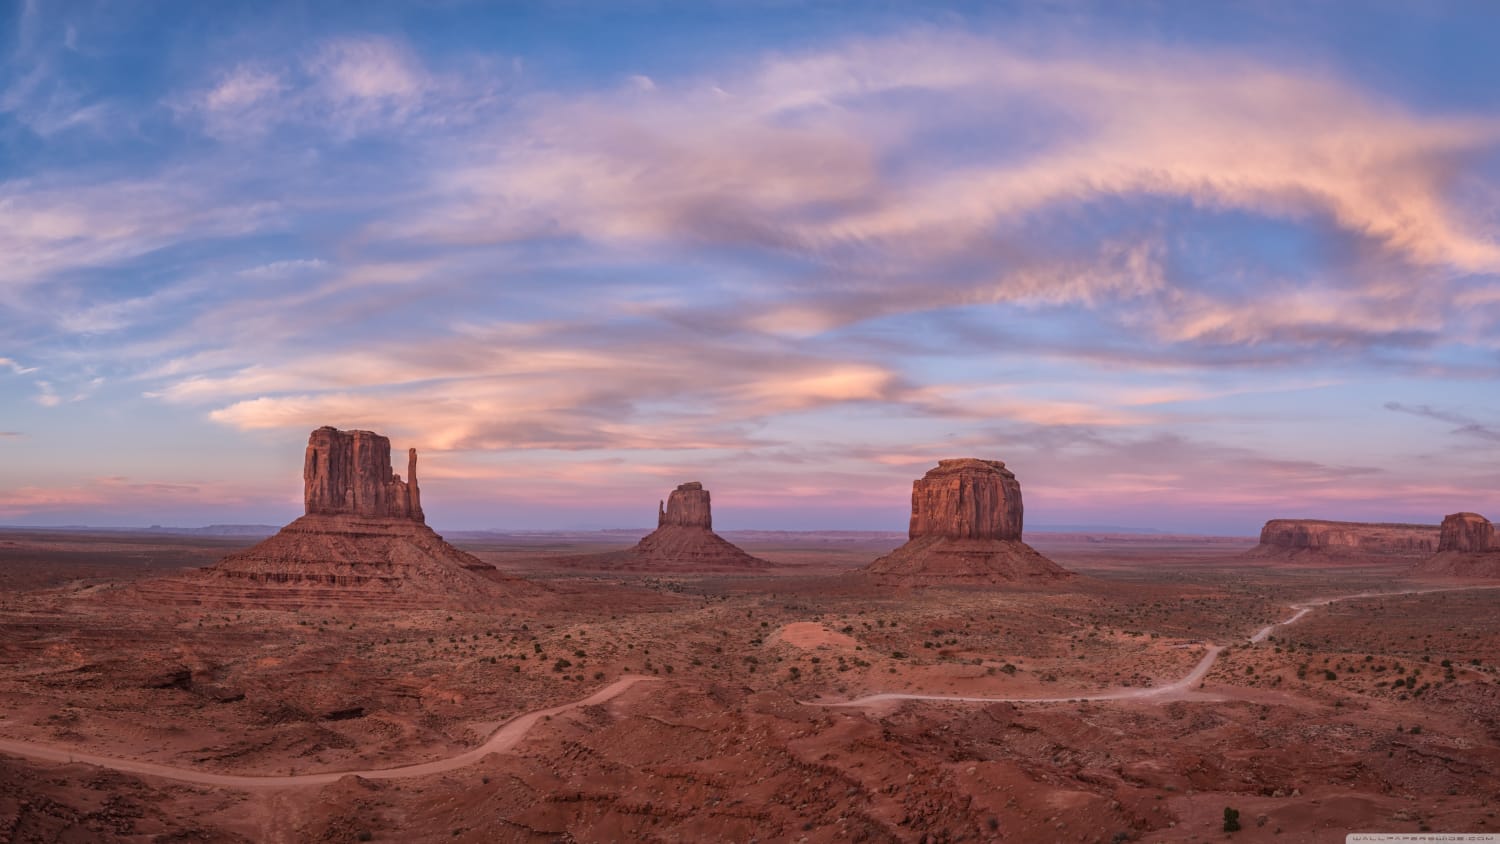 West Mitten Butte in Monument Valley, Navajo Tribal Park, Arizona (Photo credit to Diana Robinson)